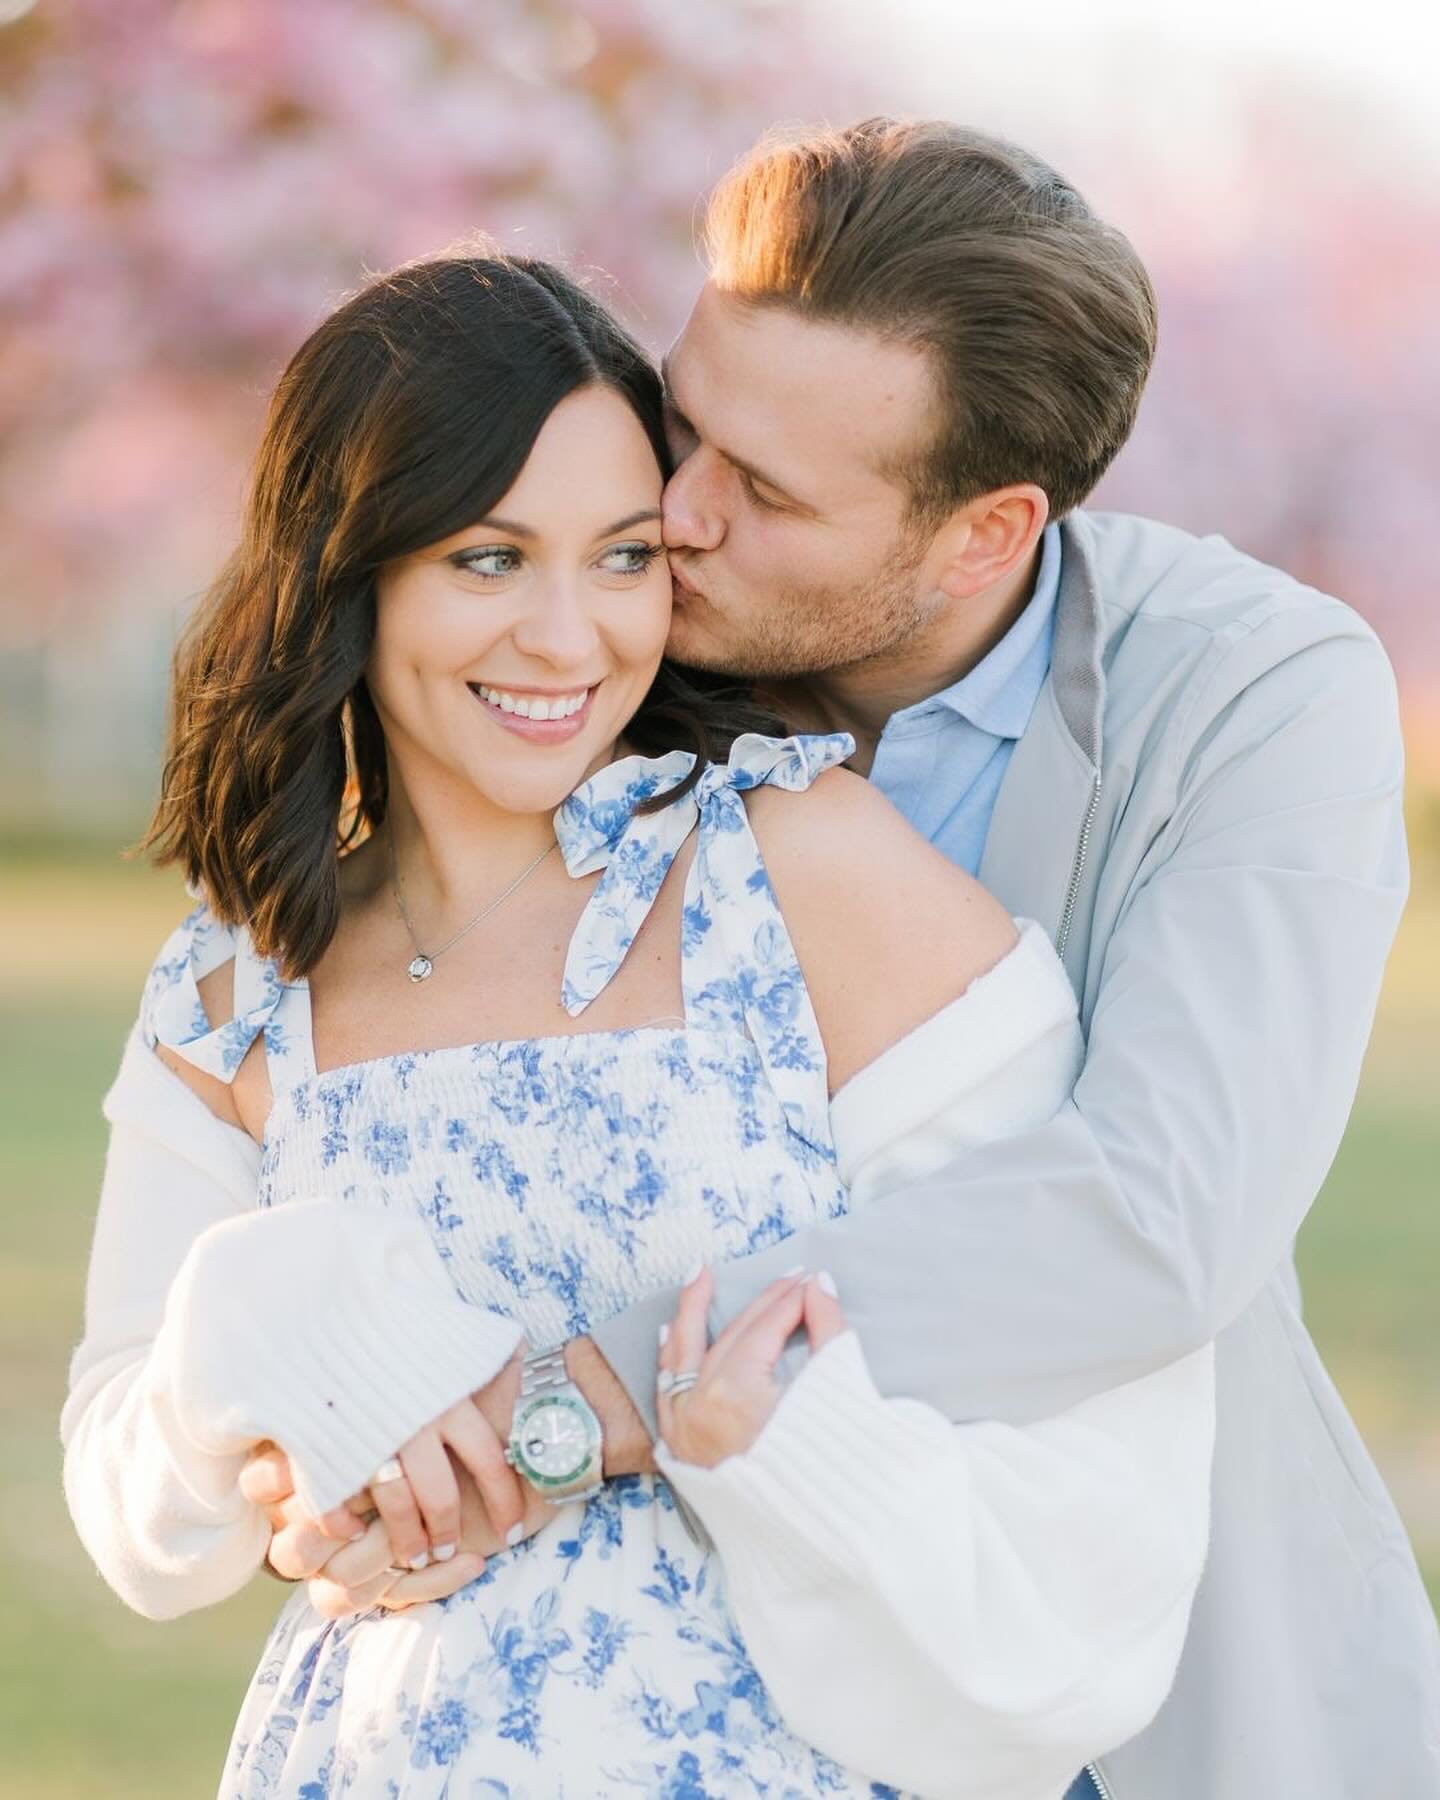 More spring blooms!

Shannon was sweet enough to bring us this gift, but it actually turned out to be the ✨ perfect✨addition to their already stylish wardrobe. We love capturing couples in love when these trees show off their pink blooms for a couple